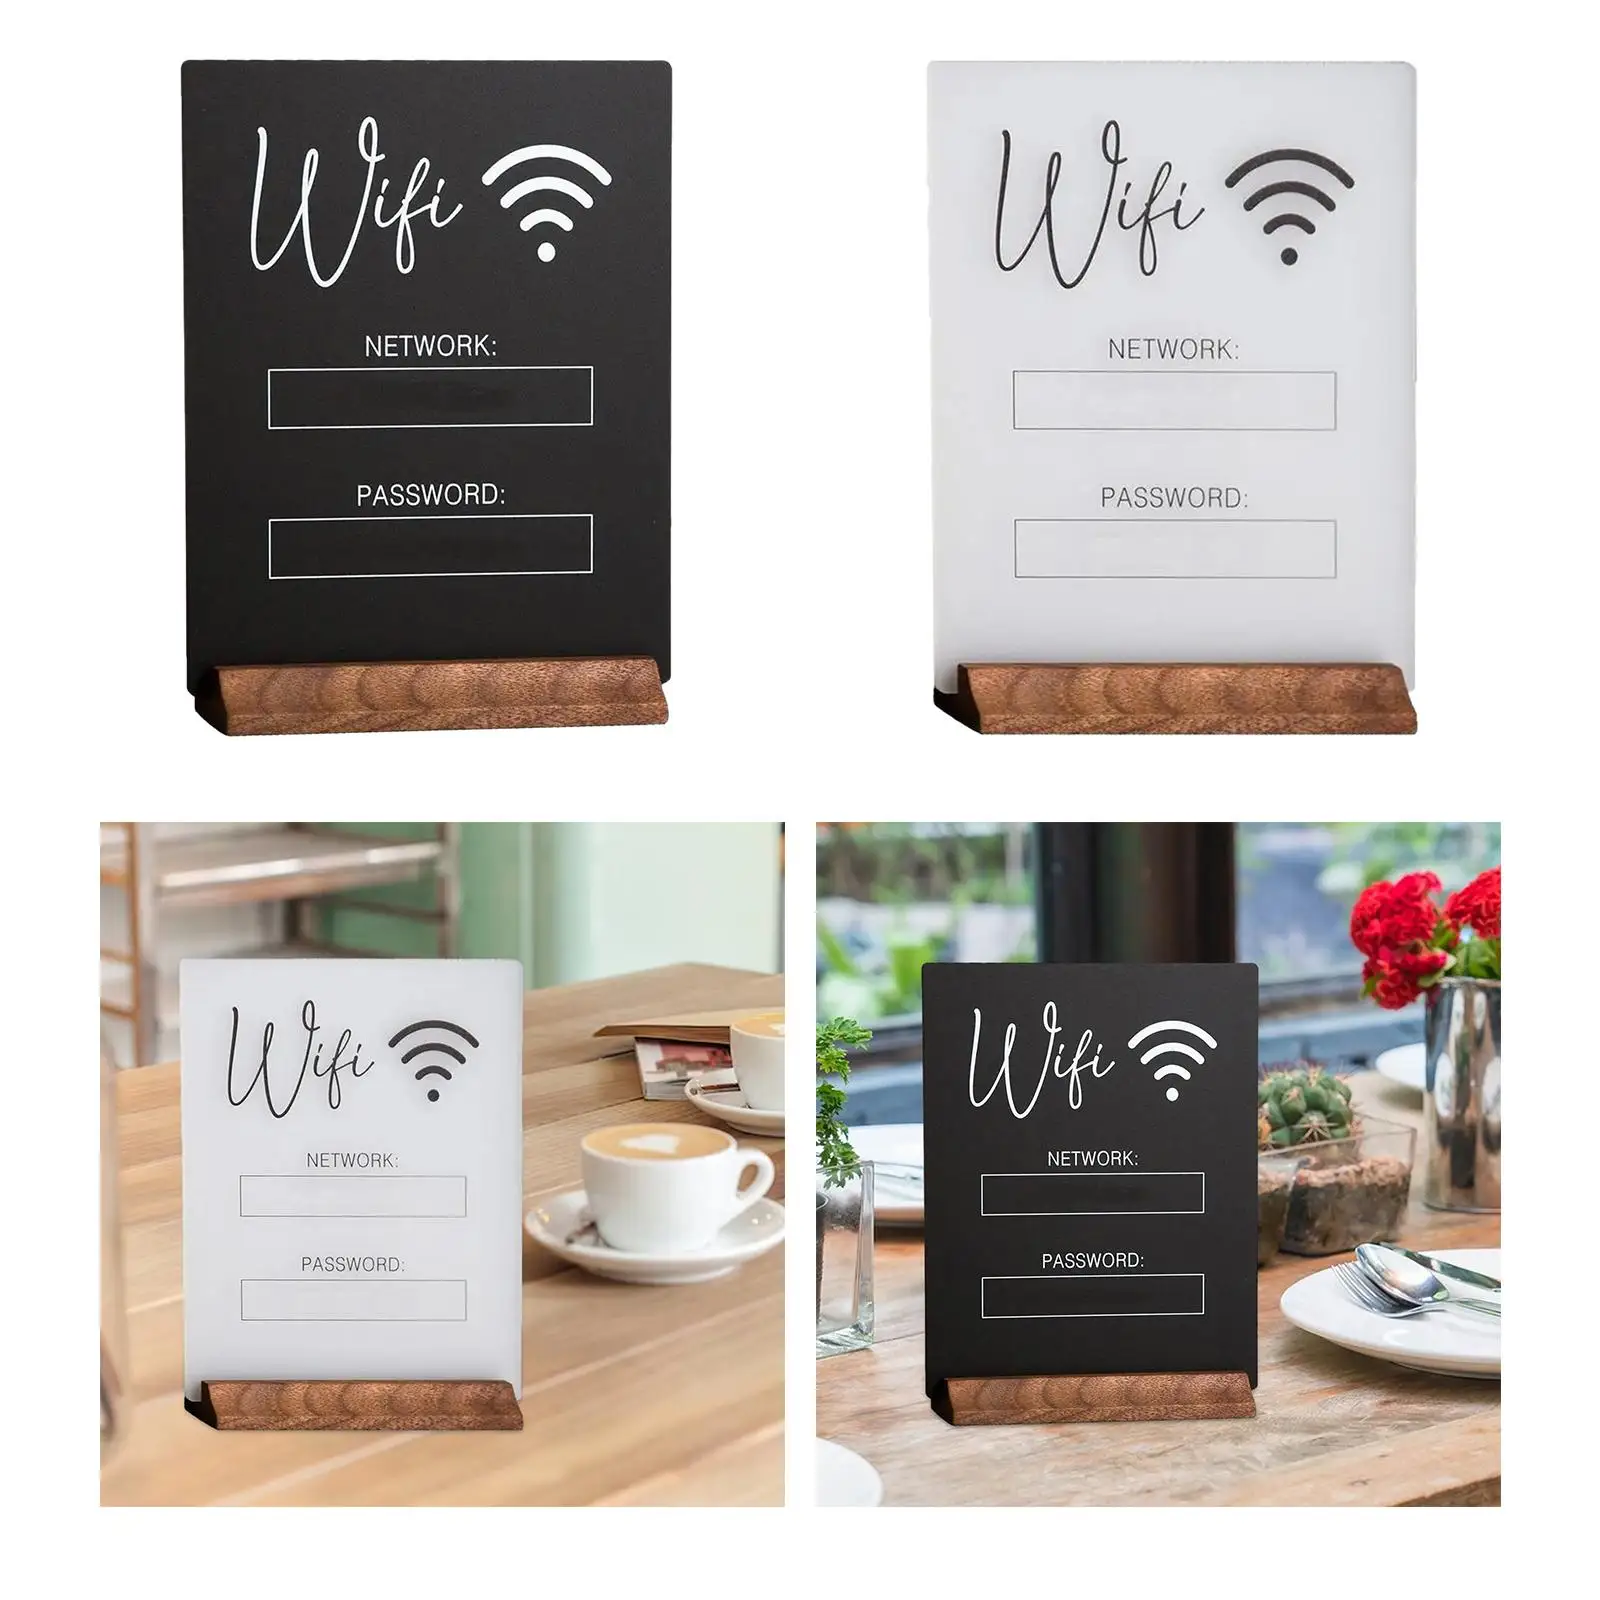 WiFi Password Sign Multifunctional Portable Freestanding Reusable Table Display Holder for Office Banquet Home Guests Desktop